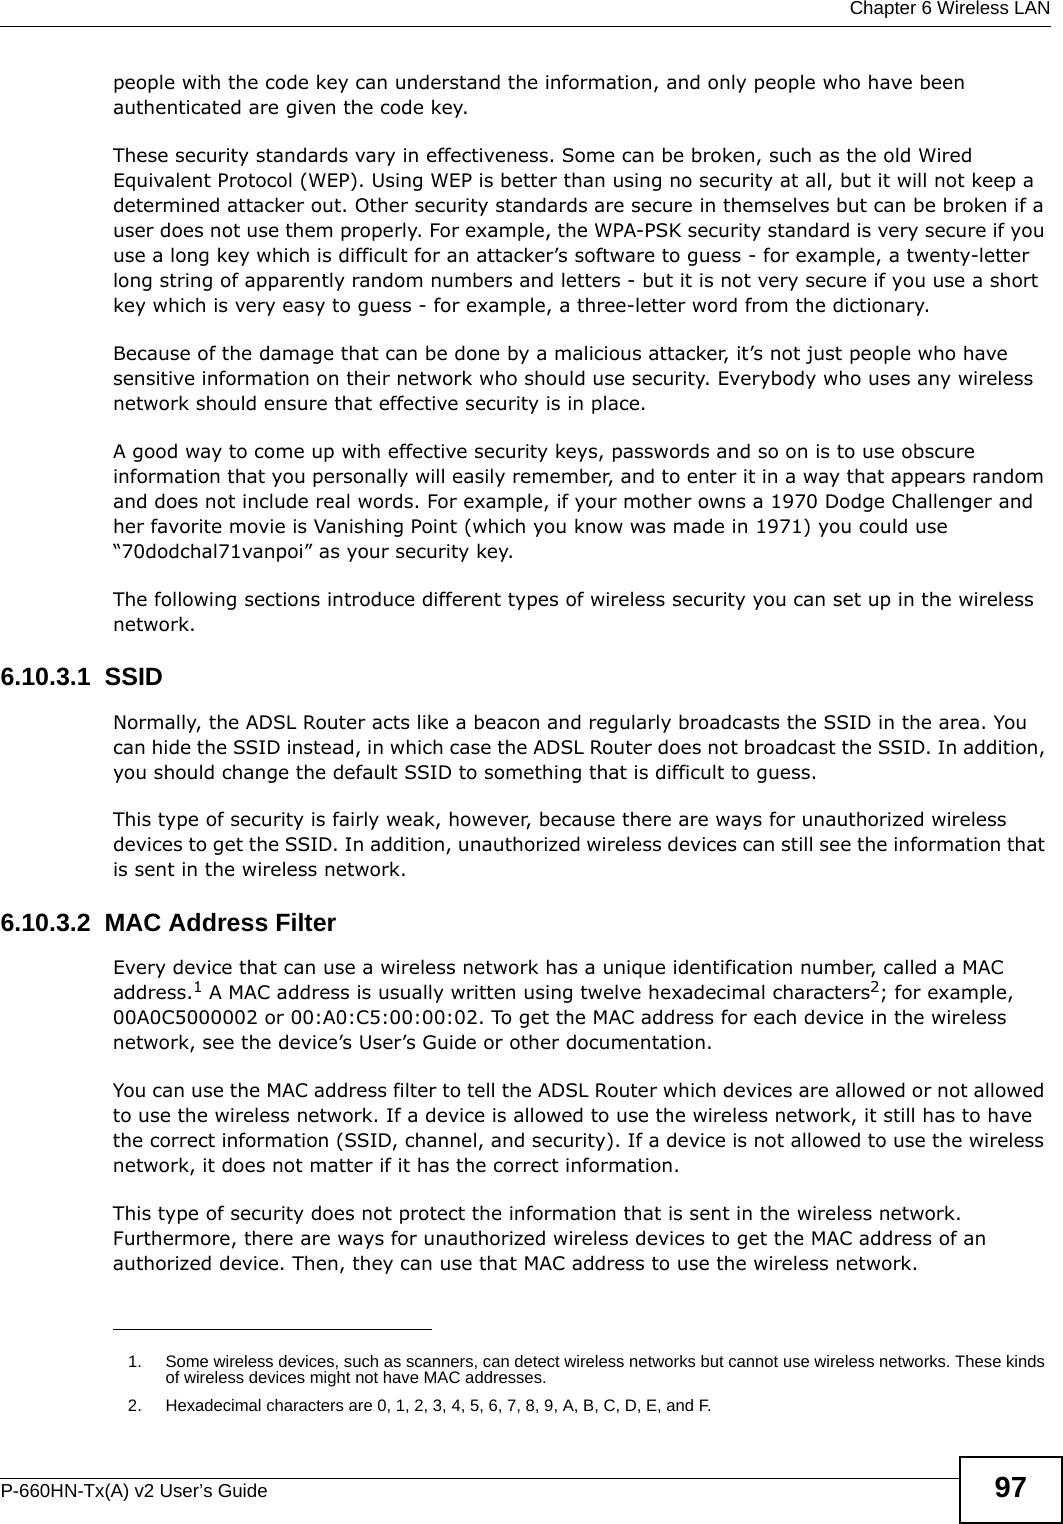  Chapter 6 Wireless LANP-660HN-Tx(A) v2 User’s Guide 97people with the code key can understand the information, and only people who have been authenticated are given the code key.These security standards vary in effectiveness. Some can be broken, such as the old Wired Equivalent Protocol (WEP). Using WEP is better than using no security at all, but it will not keep a determined attacker out. Other security standards are secure in themselves but can be broken if a user does not use them properly. For example, the WPA-PSK security standard is very secure if you use a long key which is difficult for an attacker’s software to guess - for example, a twenty-letter long string of apparently random numbers and letters - but it is not very secure if you use a short key which is very easy to guess - for example, a three-letter word from the dictionary.Because of the damage that can be done by a malicious attacker, it’s not just people who have sensitive information on their network who should use security. Everybody who uses any wireless network should ensure that effective security is in place.A good way to come up with effective security keys, passwords and so on is to use obscure information that you personally will easily remember, and to enter it in a way that appears random and does not include real words. For example, if your mother owns a 1970 Dodge Challenger and her favorite movie is Vanishing Point (which you know was made in 1971) you could use “70dodchal71vanpoi” as your security key.The following sections introduce different types of wireless security you can set up in the wireless network.6.10.3.1  SSIDNormally, the ADSL Router acts like a beacon and regularly broadcasts the SSID in the area. You can hide the SSID instead, in which case the ADSL Router does not broadcast the SSID. In addition, you should change the default SSID to something that is difficult to guess.This type of security is fairly weak, however, because there are ways for unauthorized wireless devices to get the SSID. In addition, unauthorized wireless devices can still see the information that is sent in the wireless network.6.10.3.2  MAC Address FilterEvery device that can use a wireless network has a unique identification number, called a MAC address.1 A MAC address is usually written using twelve hexadecimal characters2; for example, 00A0C5000002 or 00:A0:C5:00:00:02. To get the MAC address for each device in the wireless network, see the device’s User’s Guide or other documentation.You can use the MAC address filter to tell the ADSL Router which devices are allowed or not allowed to use the wireless network. If a device is allowed to use the wireless network, it still has to have the correct information (SSID, channel, and security). If a device is not allowed to use the wireless network, it does not matter if it has the correct information.This type of security does not protect the information that is sent in the wireless network. Furthermore, there are ways for unauthorized wireless devices to get the MAC address of an authorized device. Then, they can use that MAC address to use the wireless network.1. Some wireless devices, such as scanners, can detect wireless networks but cannot use wireless networks. These kinds of wireless devices might not have MAC addresses.2. Hexadecimal characters are 0, 1, 2, 3, 4, 5, 6, 7, 8, 9, A, B, C, D, E, and F.